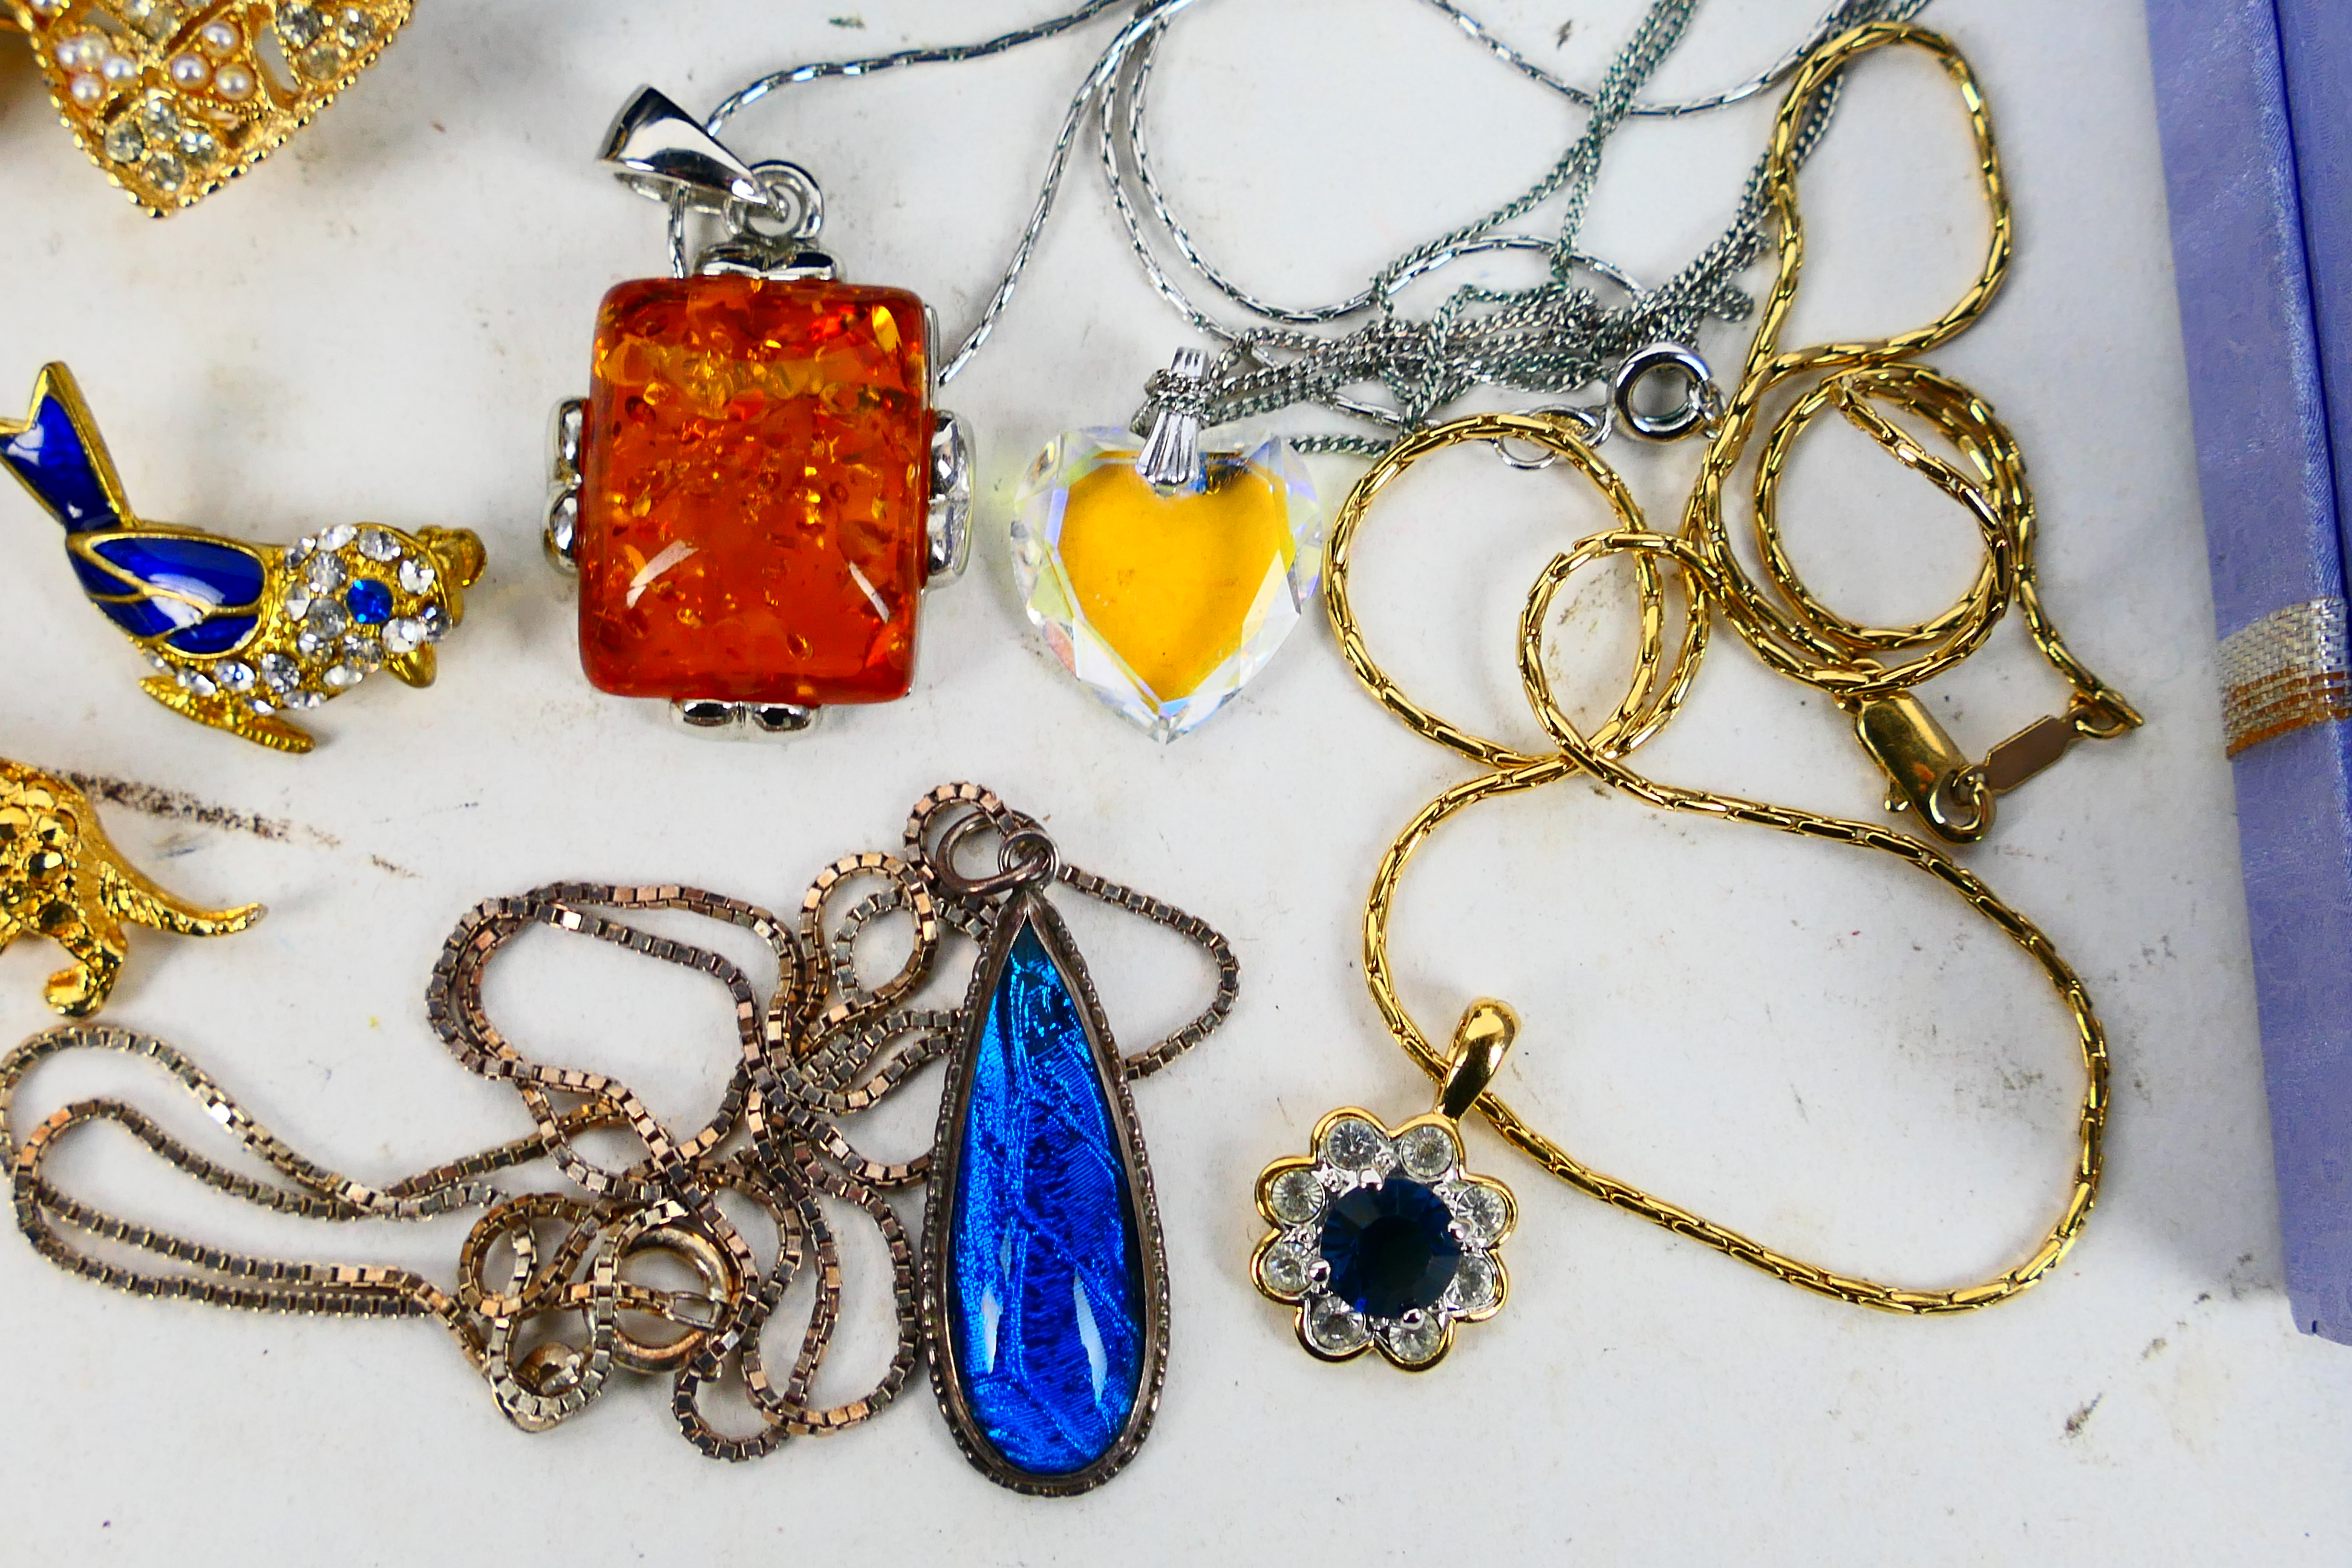 Costume jewellery to include necklaces and brooches. - Image 5 of 7